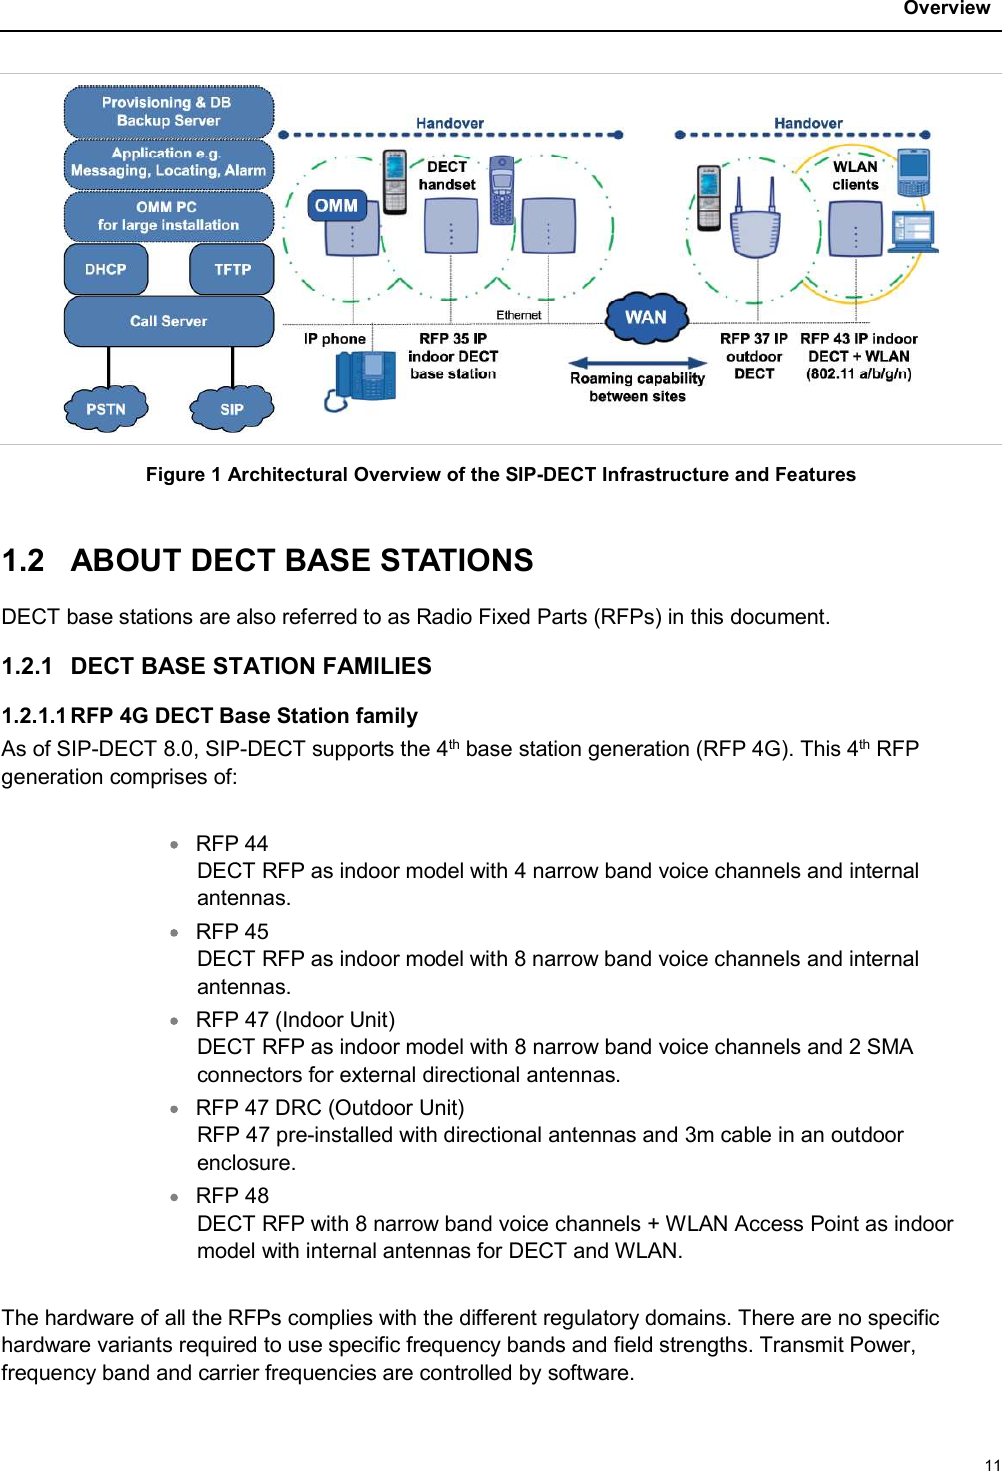 Overview11Figure 1 Architectural Overview of the SIP-DECT Infrastructure and Features1.2 ABOUT DECT BASE STATIONSDECT base stations are also referred to as Radio Fixed Parts (RFPs) in this document.1.2.1 DECT BASE STATION FAMILIES1.2.1.1RFP 4G DECT Base Station familyAs of SIP-DECT 8.0, SIP-DECT supports the 4th base station generation (RFP 4G). This 4th RFP generation comprises of:RFP 44DECT RFP as indoor model with 4 narrow band voice channels and internal antennas.RFP 45DECT RFP as indoor model with 8 narrow band voice channels and internal antennas.RFP 47 (Indoor Unit)DECT RFP as indoor model with 8 narrow band voice channels and 2 SMA connectors for external directional antennas.RFP 47 DRC (Outdoor Unit)RFP 47 pre-installed with directional antennas and 3m cable in an outdoor enclosure.RFP 48DECT RFP with 8 narrow band voice channels + WLAN Access Point as indoor model with internal antennas for DECT and WLAN.The hardware of all the RFPs complies with the different regulatory domains. There are no specific hardware variants required to use specific frequency bands and field strengths. Transmit Power, frequency band and carrier frequencies are controlled by software.